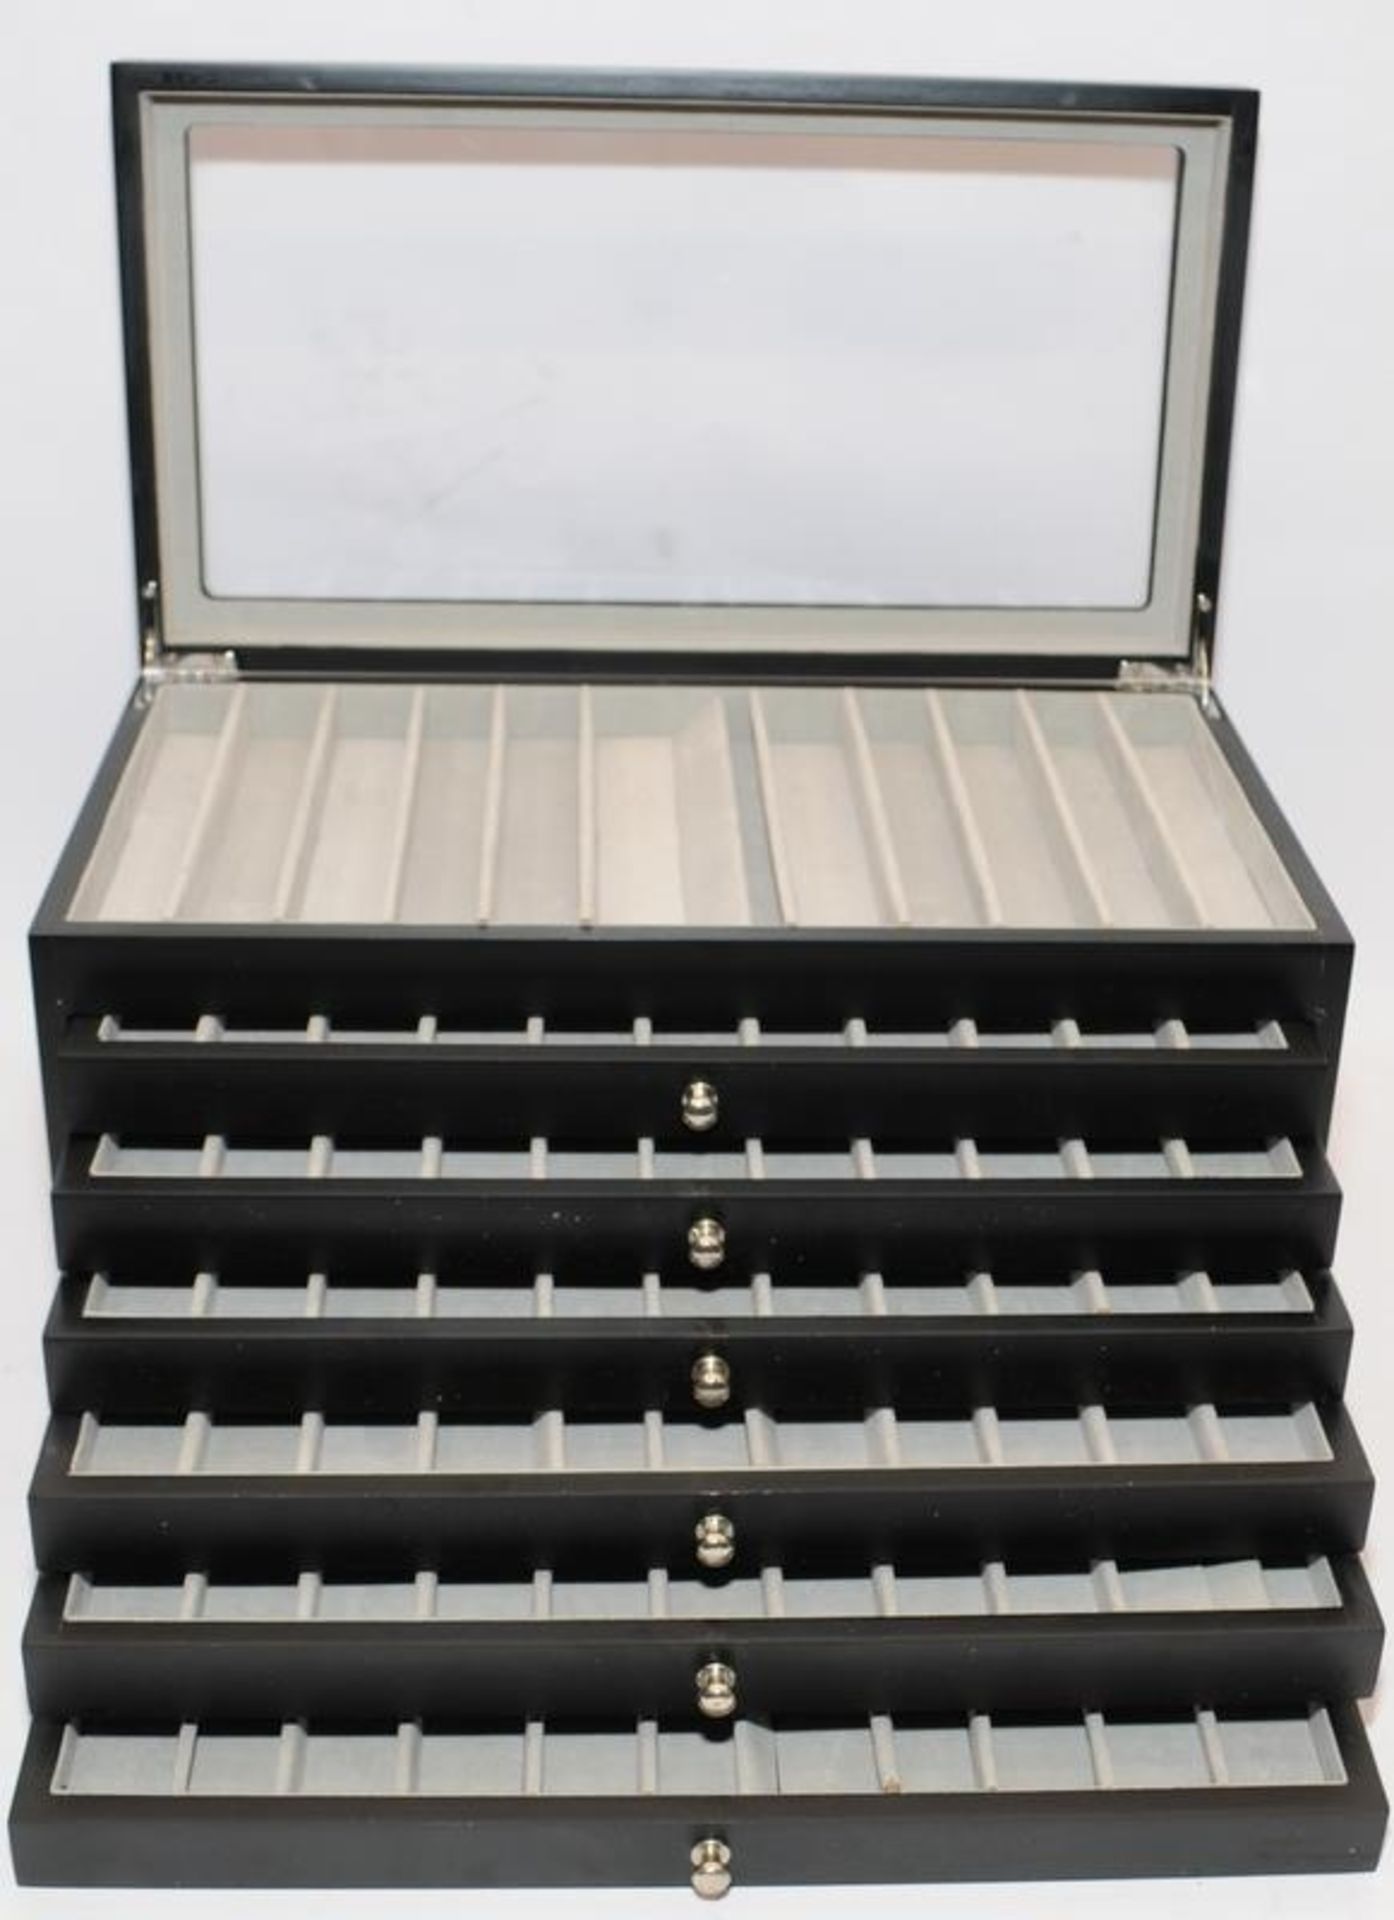 Quality storage/display box for pens. Hinged lid over 6 drawers capable of storing up to 78 pens. - Image 3 of 4